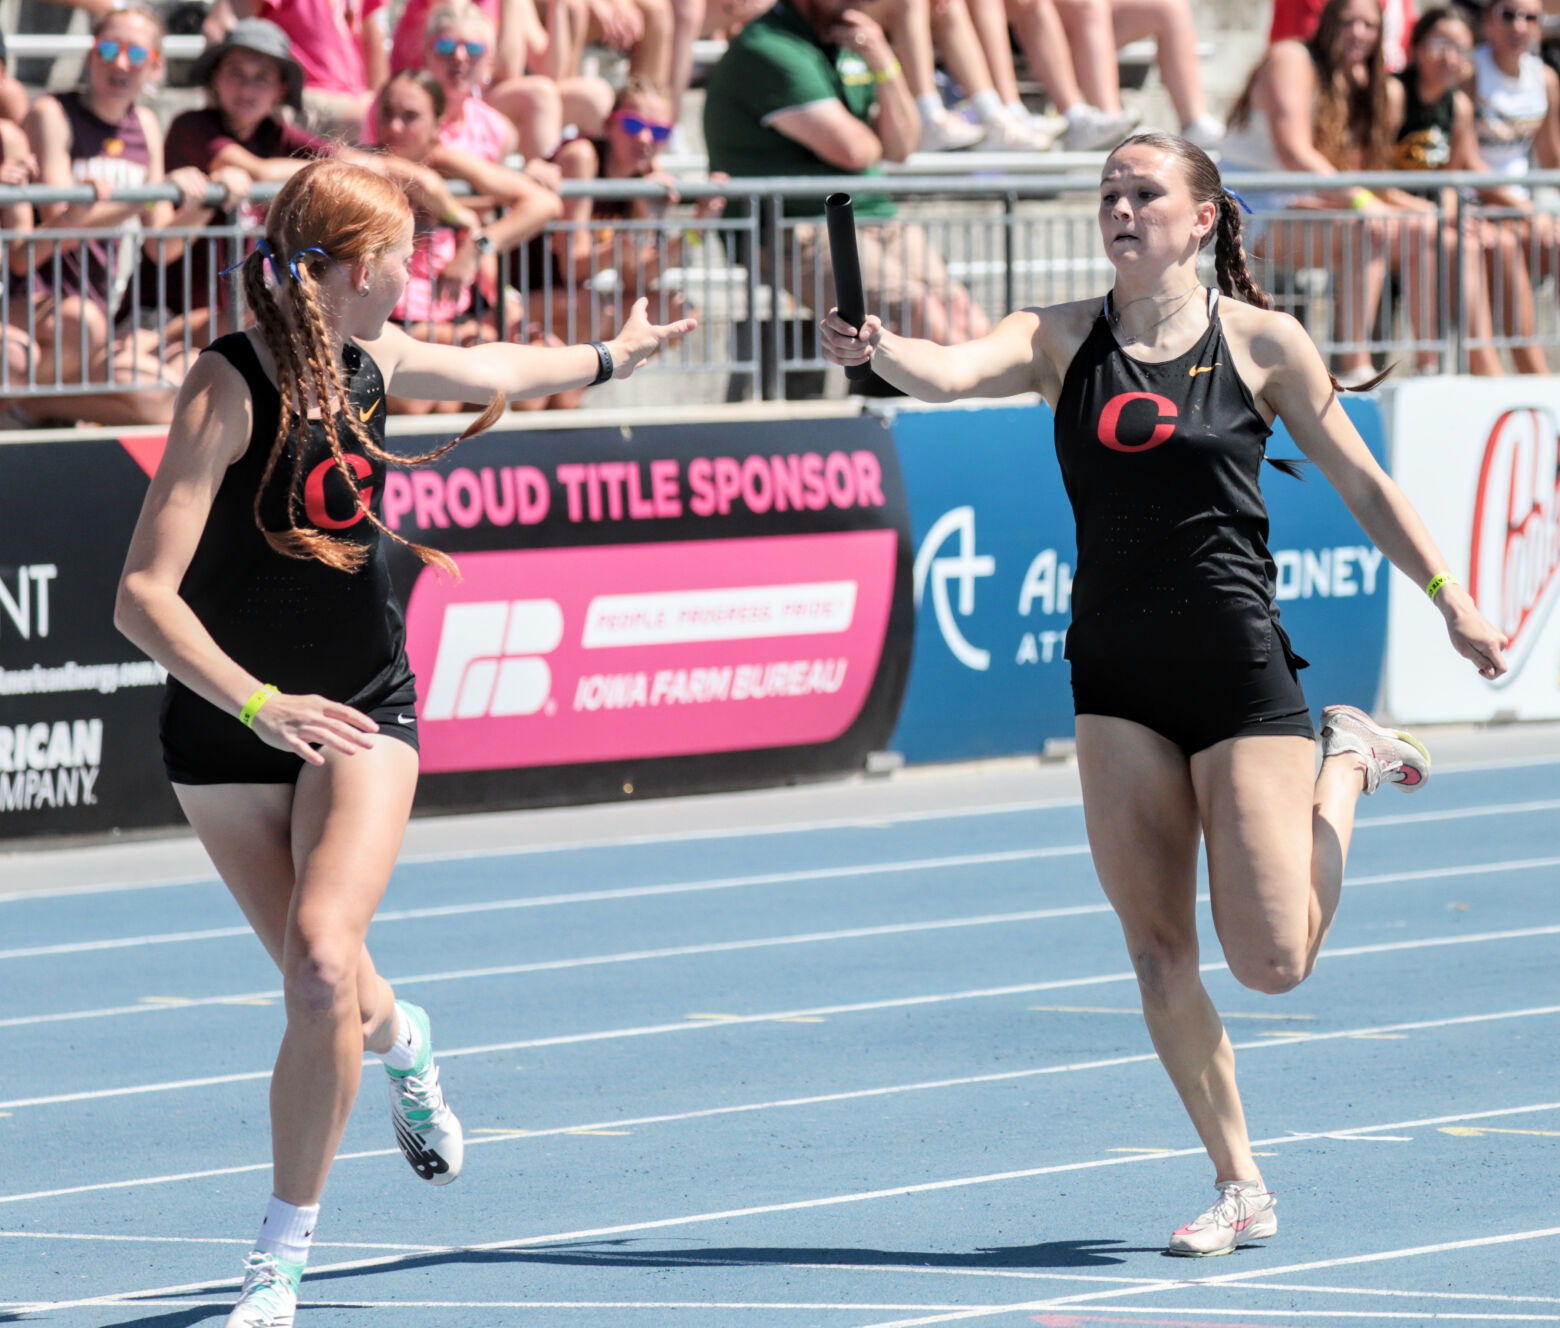 Iowa High School Track & Field Championships: Clinton’s Distance Medley Team Achieves a PR in 1600 Meters